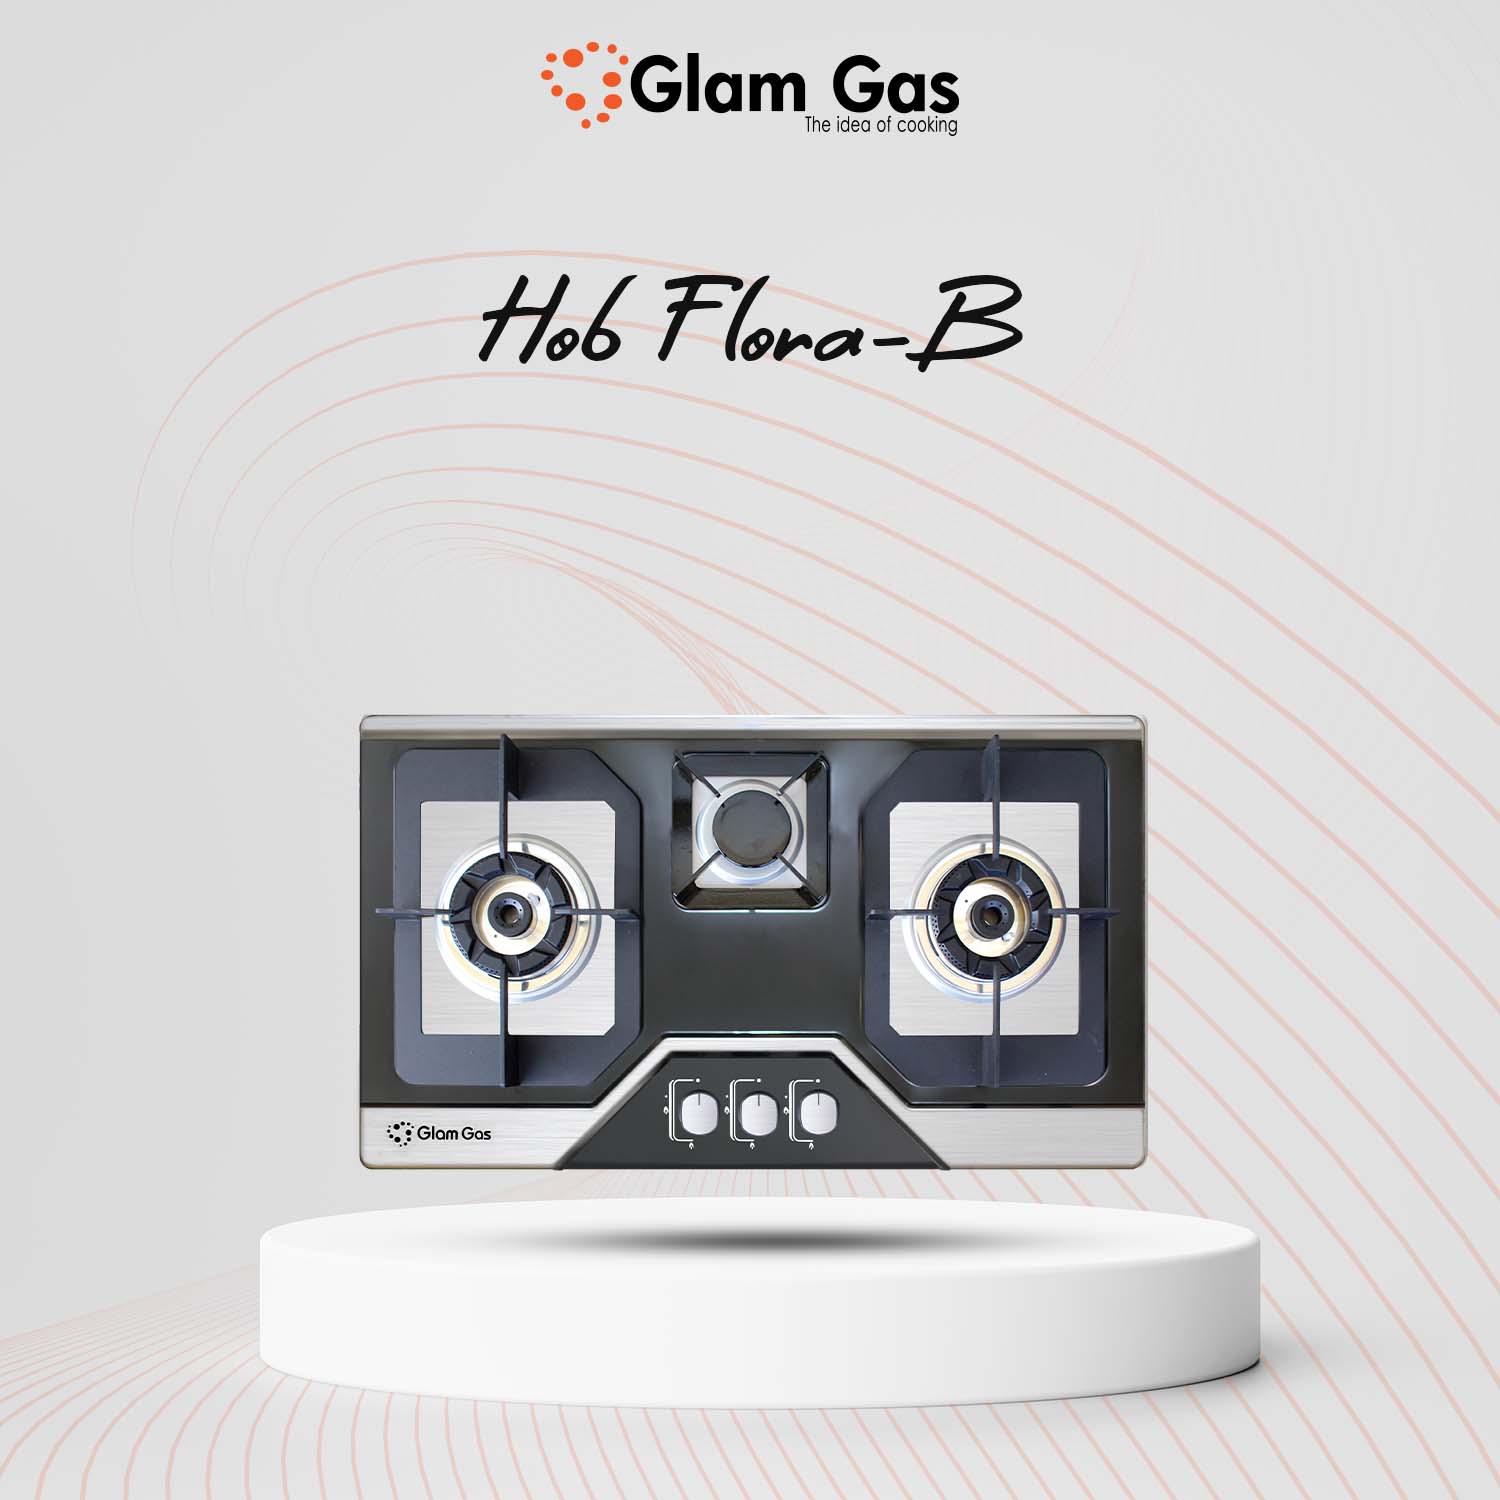 Glamgas-Flora B-gas cooking burner its flexible Price Online Shop Now 